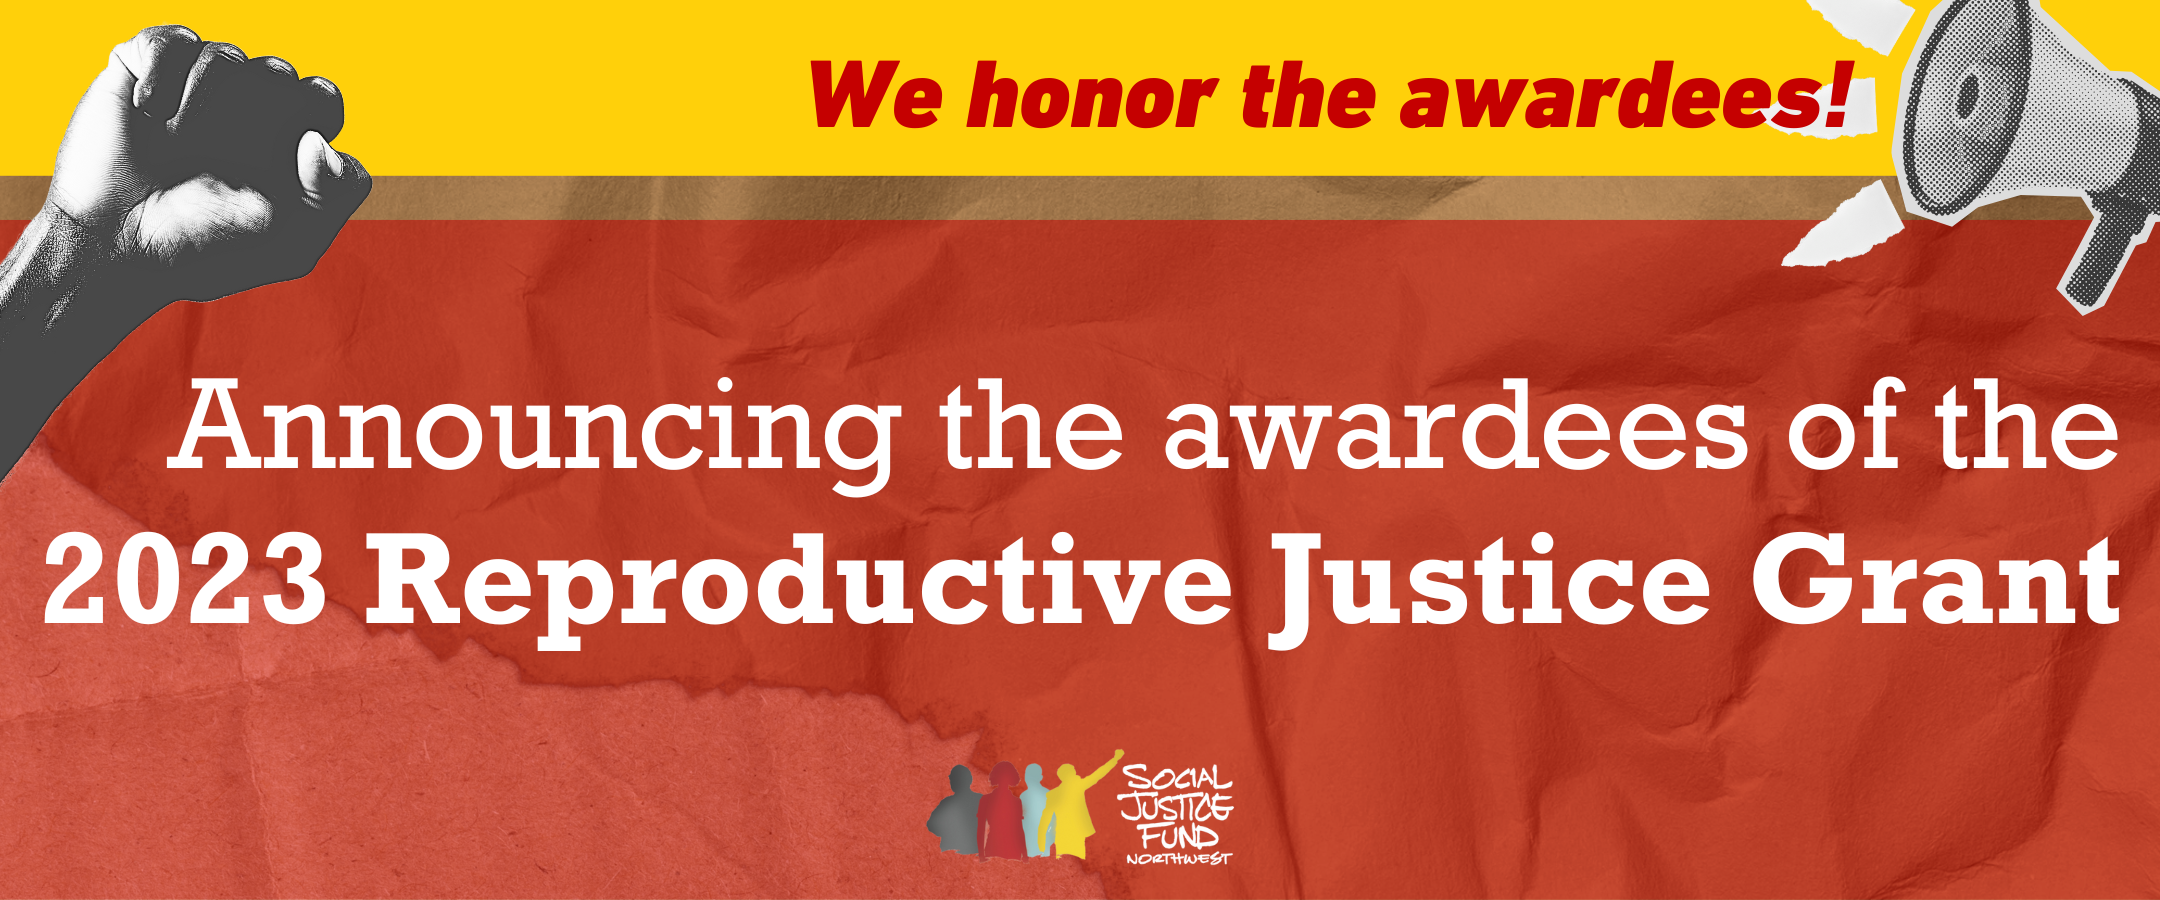 Rectangular banner with bright collage background in yellow red and cardboard brown. Cutout pictures of a fist raised in protest and a megaphone decorate the corners. Text reads We honor the awardees. announcing the awardees of the 2023 Reproductive Justice Grant. SJFs logo is in the bottom center